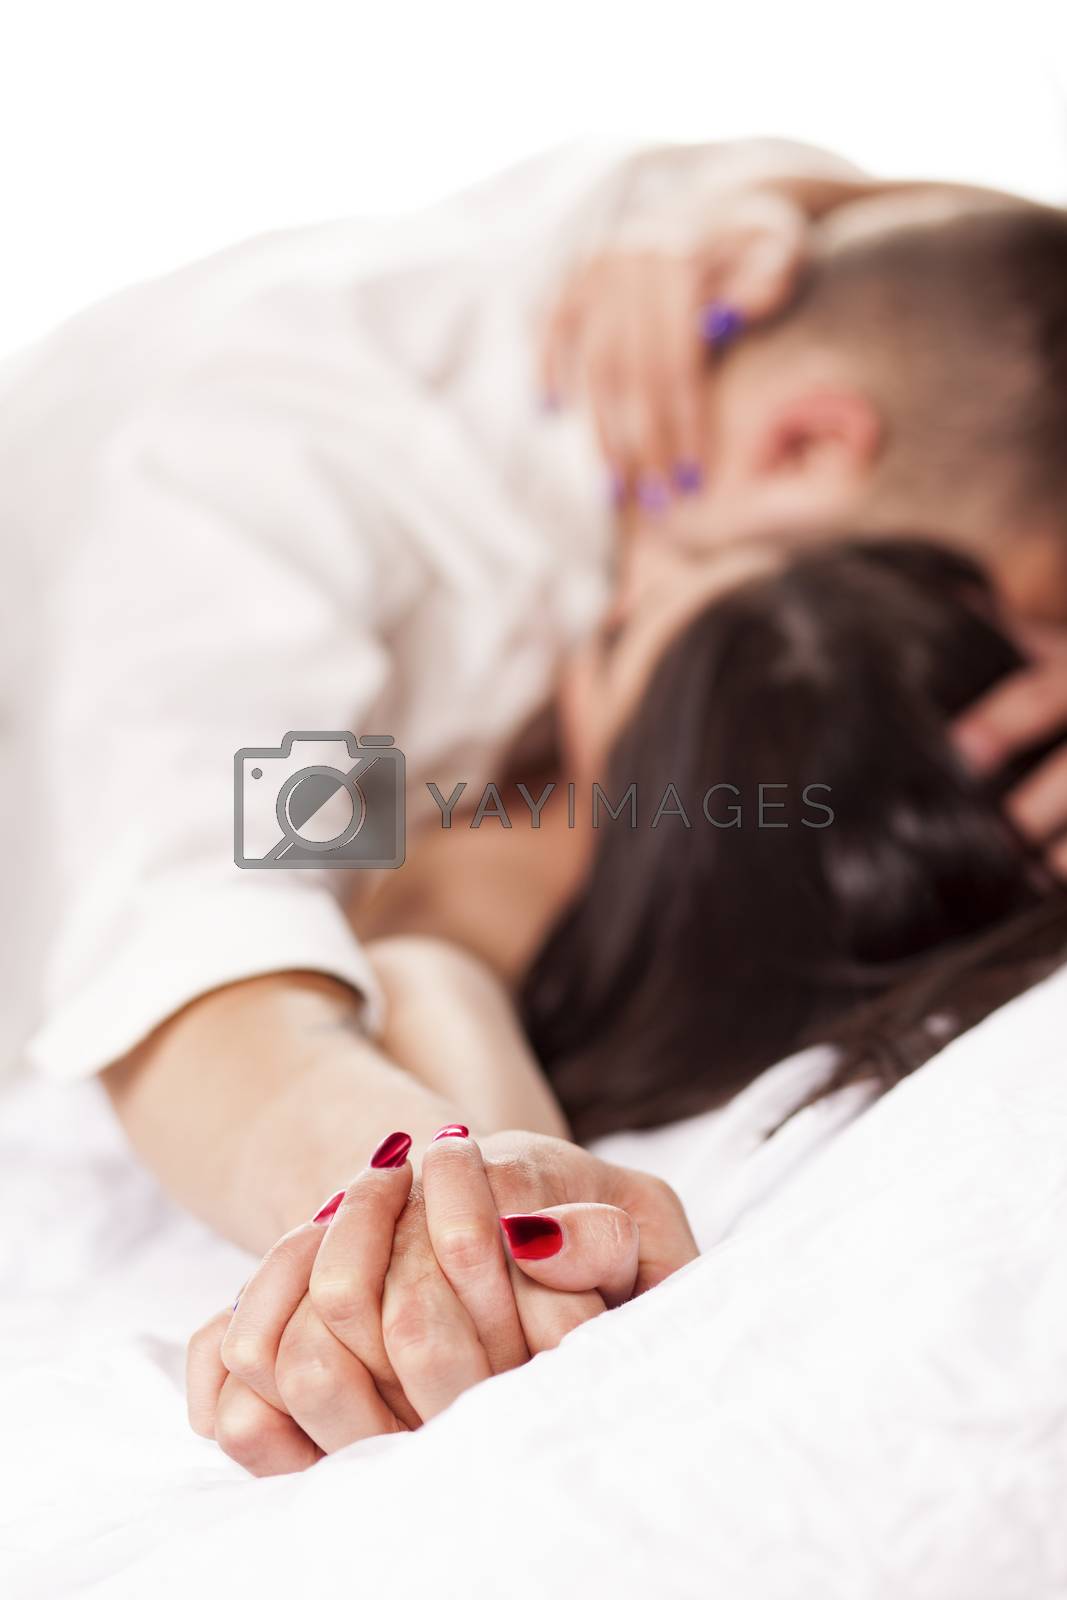 Royalty free image of a young couple in a sexual position by Vladimirfloyd